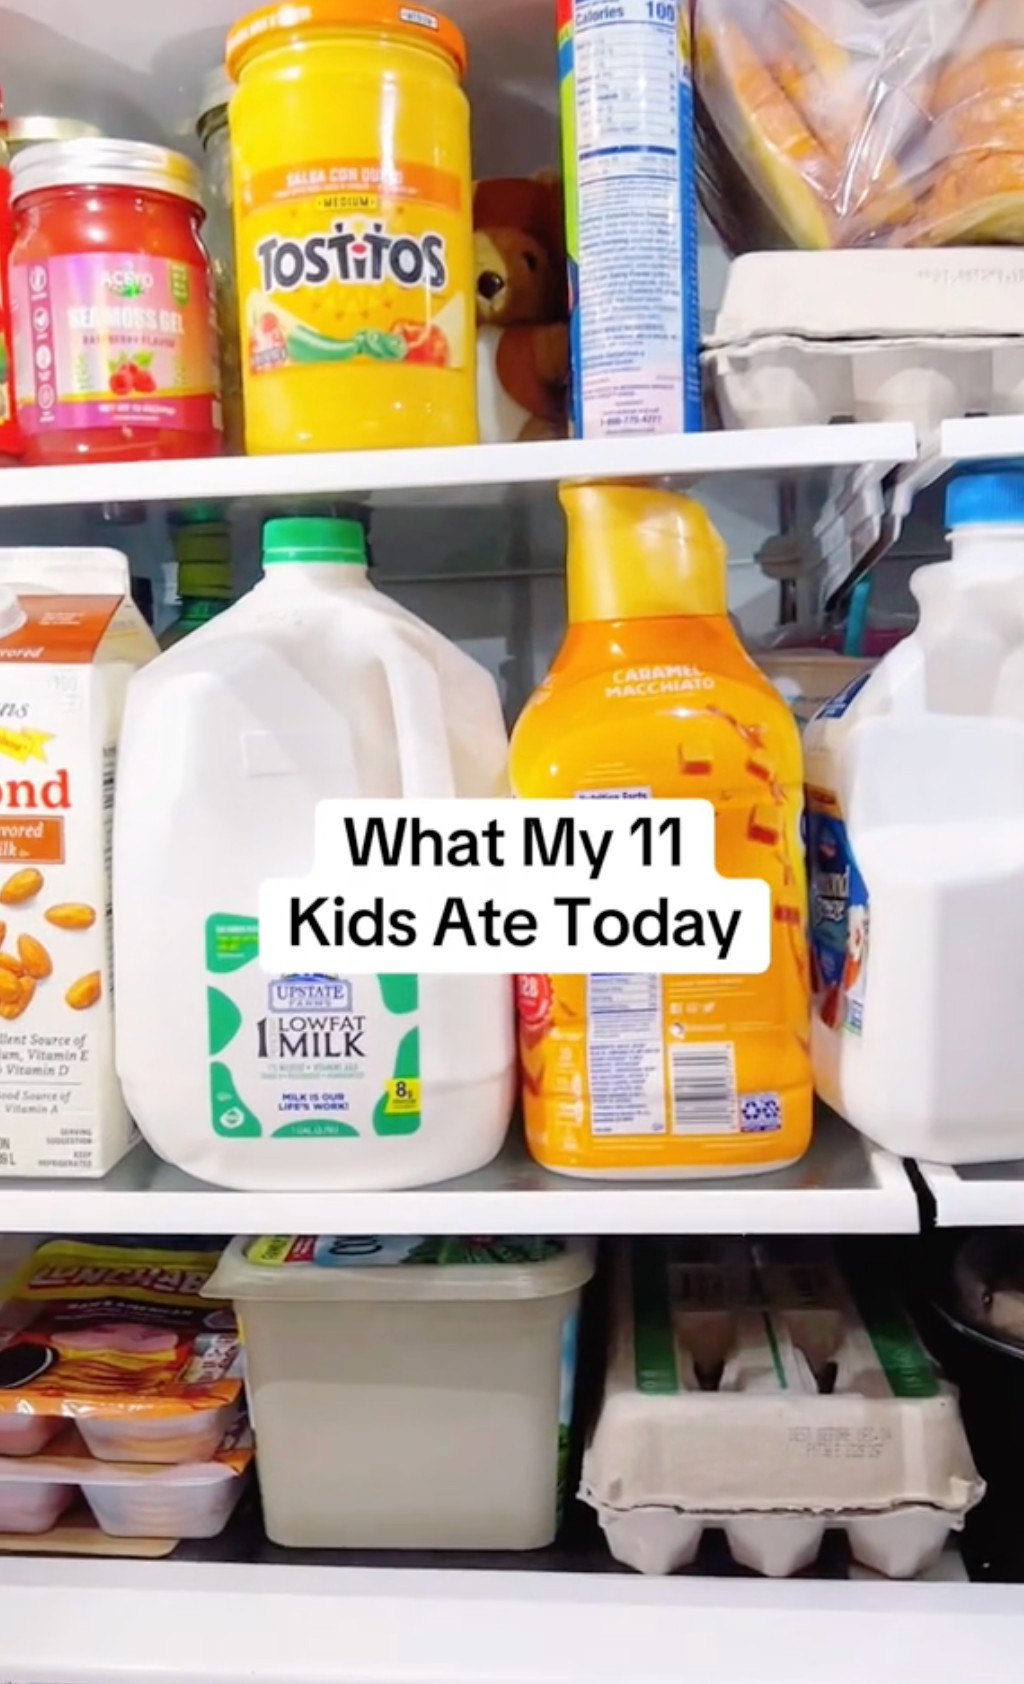 A full fridge, text reads, “What My 11 Kids Ate Today.”